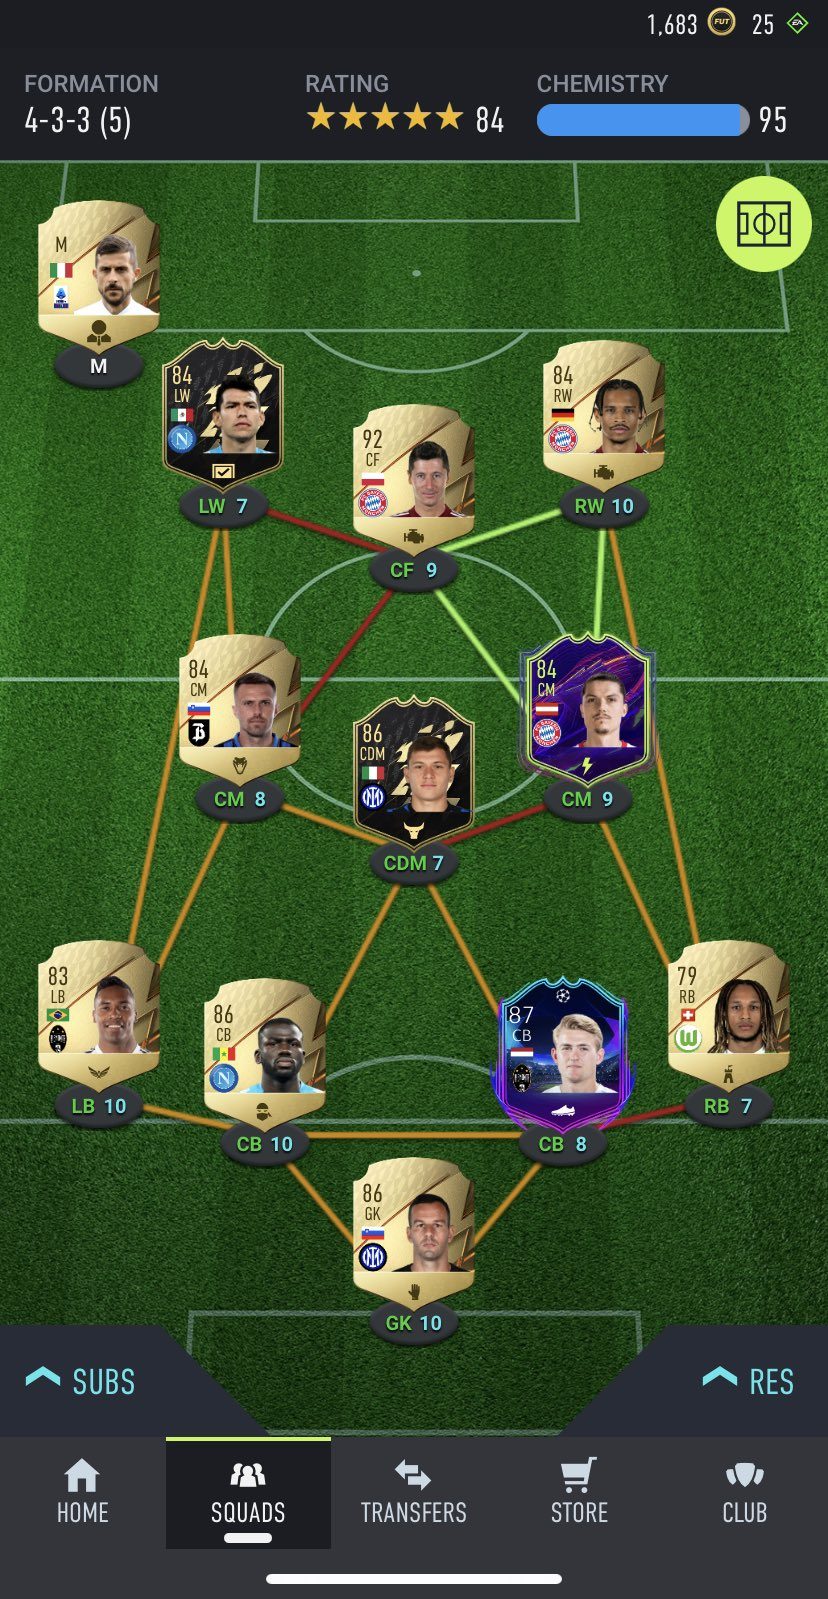 5 Tips to Improve Your Team’s Chemistry in FIFA 22 Ultimate Team